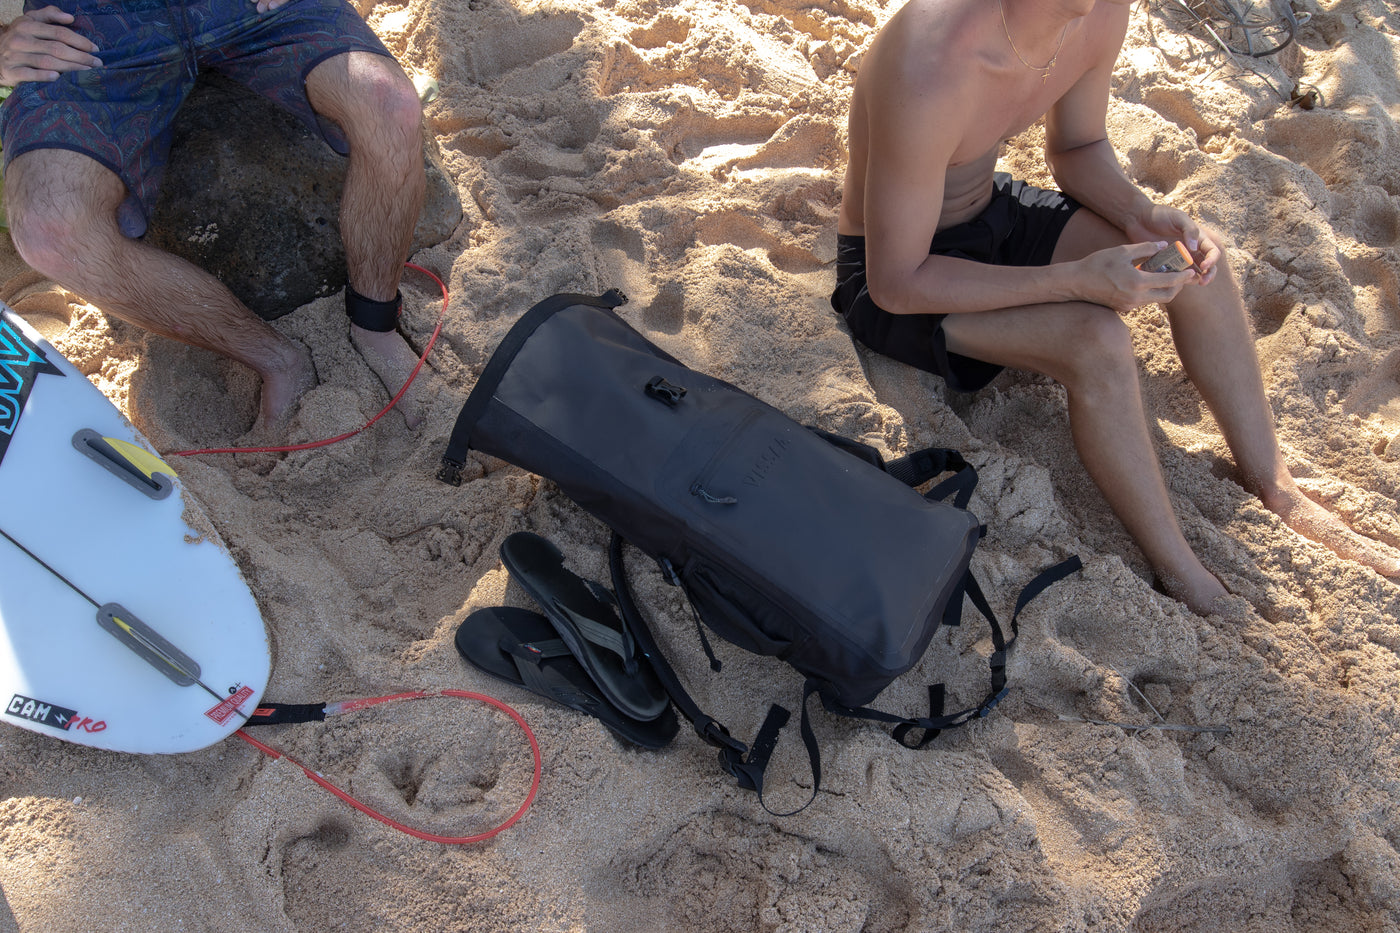 Surf Bags